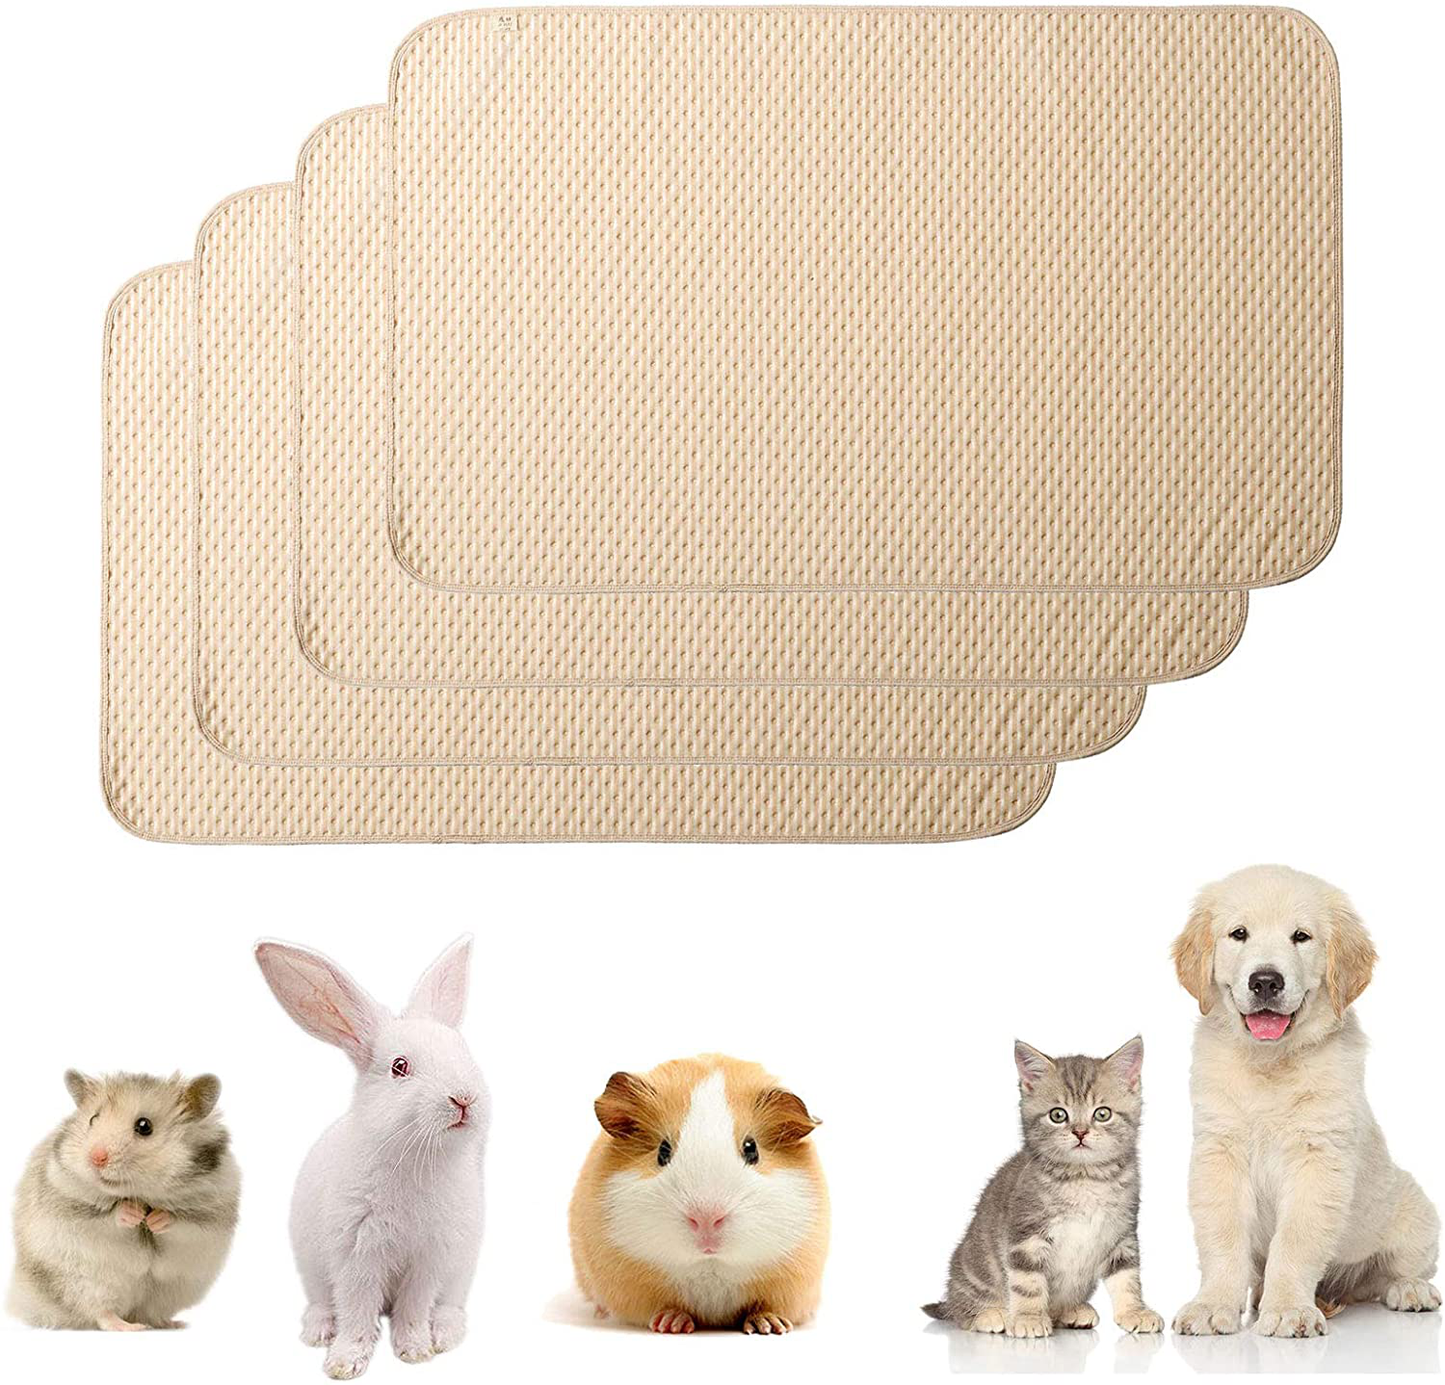 Kathson Guinea Pig Cage Liner, 4 Pack Bedding Pads Washable Absorbent Reusable Waterproof Mats for Guinea Pig Rabbit Bunny Hamster Cat Puppy Small Animals